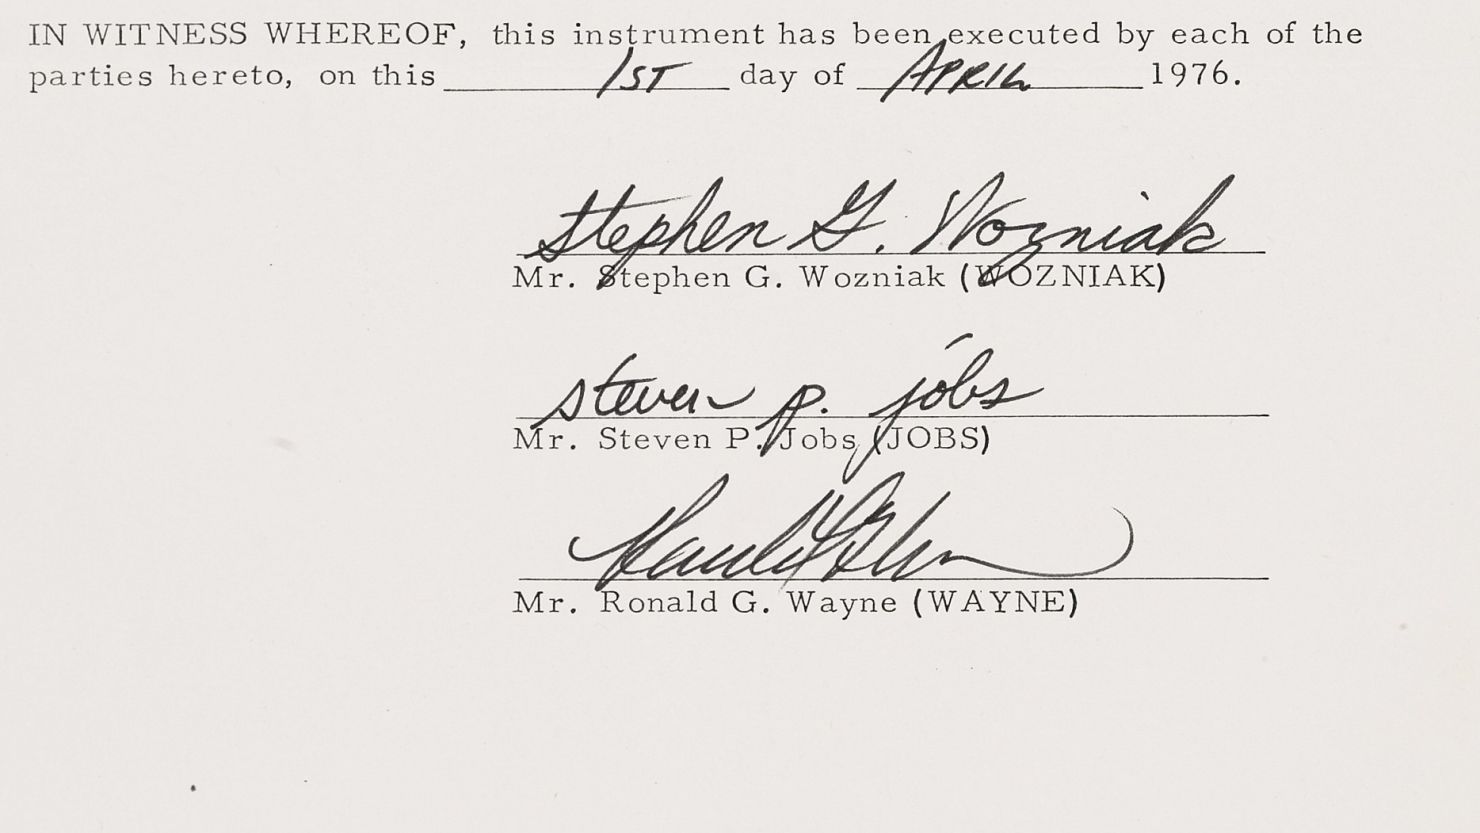 The documents were signed by Steve Jobs, Steve Wozniak and "forgotten founder" Ron Wayne.